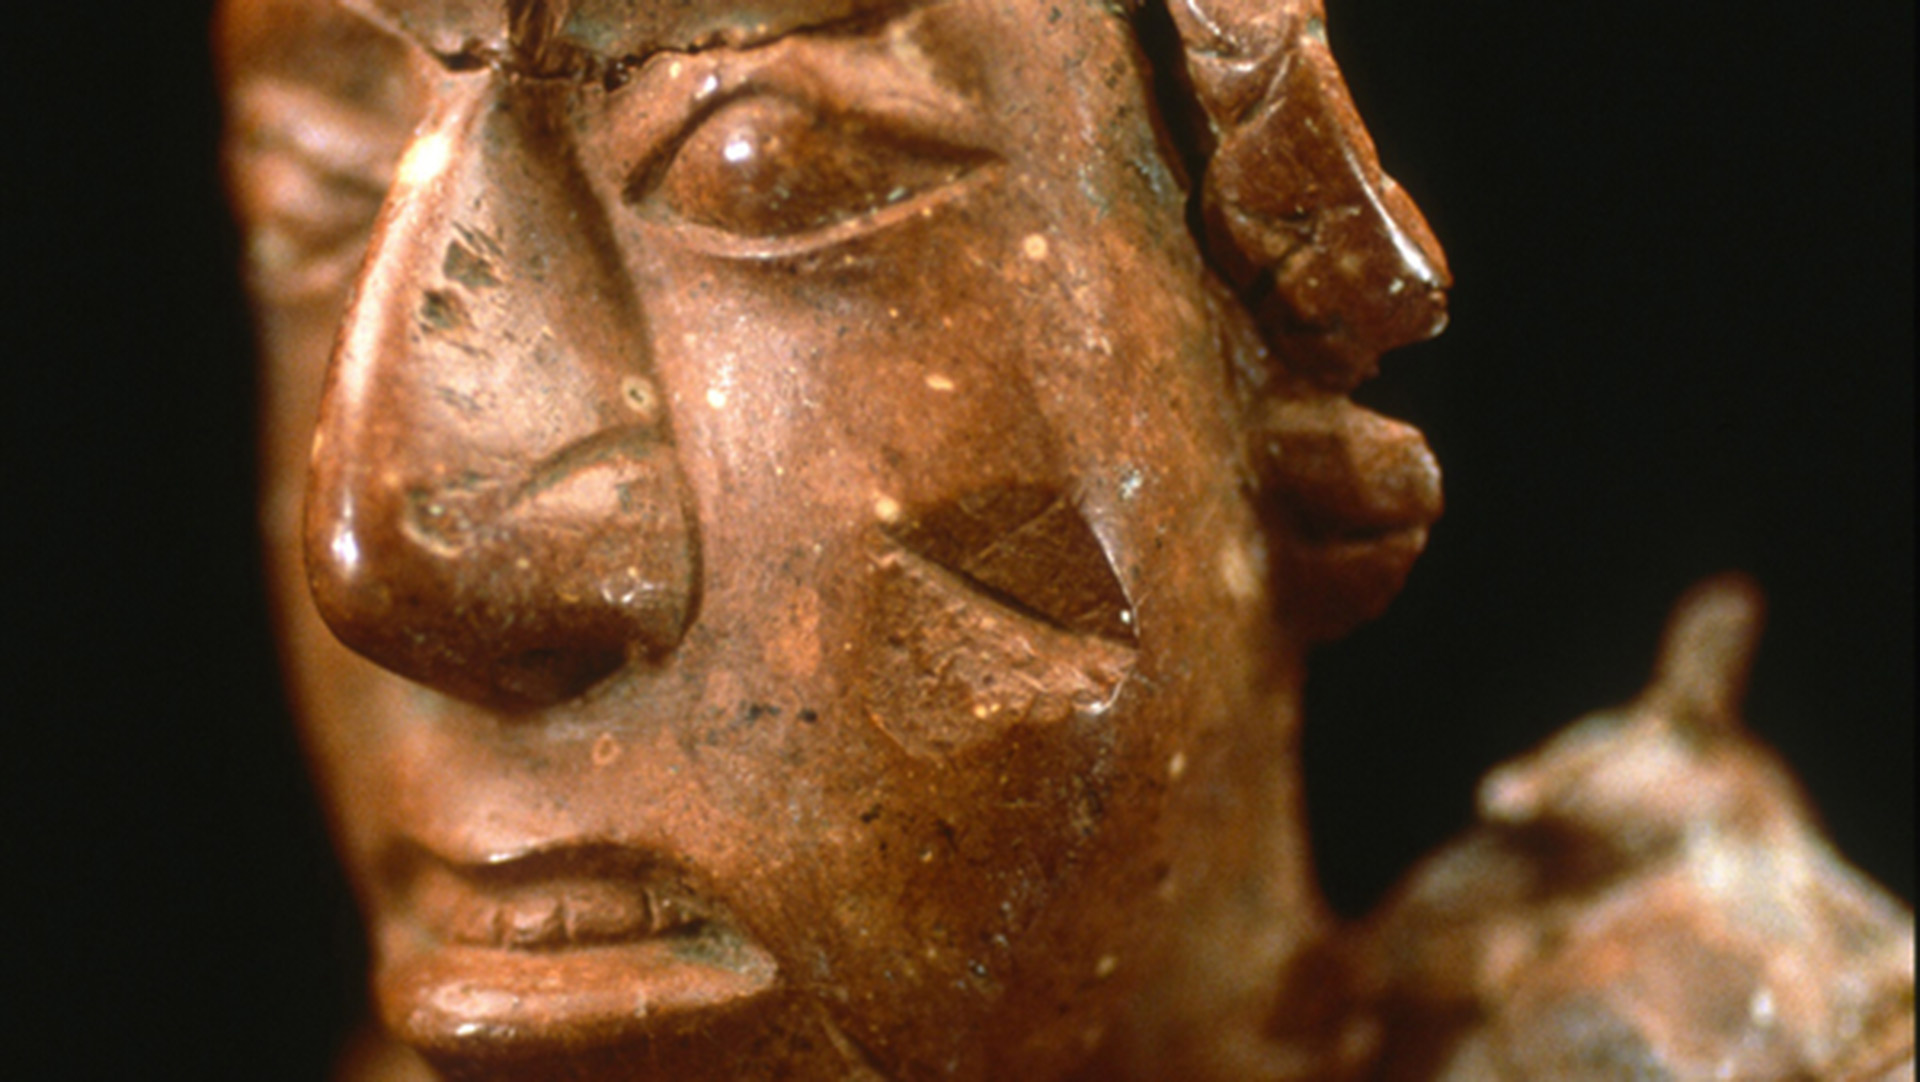 Close-up of the face of a Cahokian figurine called the Birger figure.